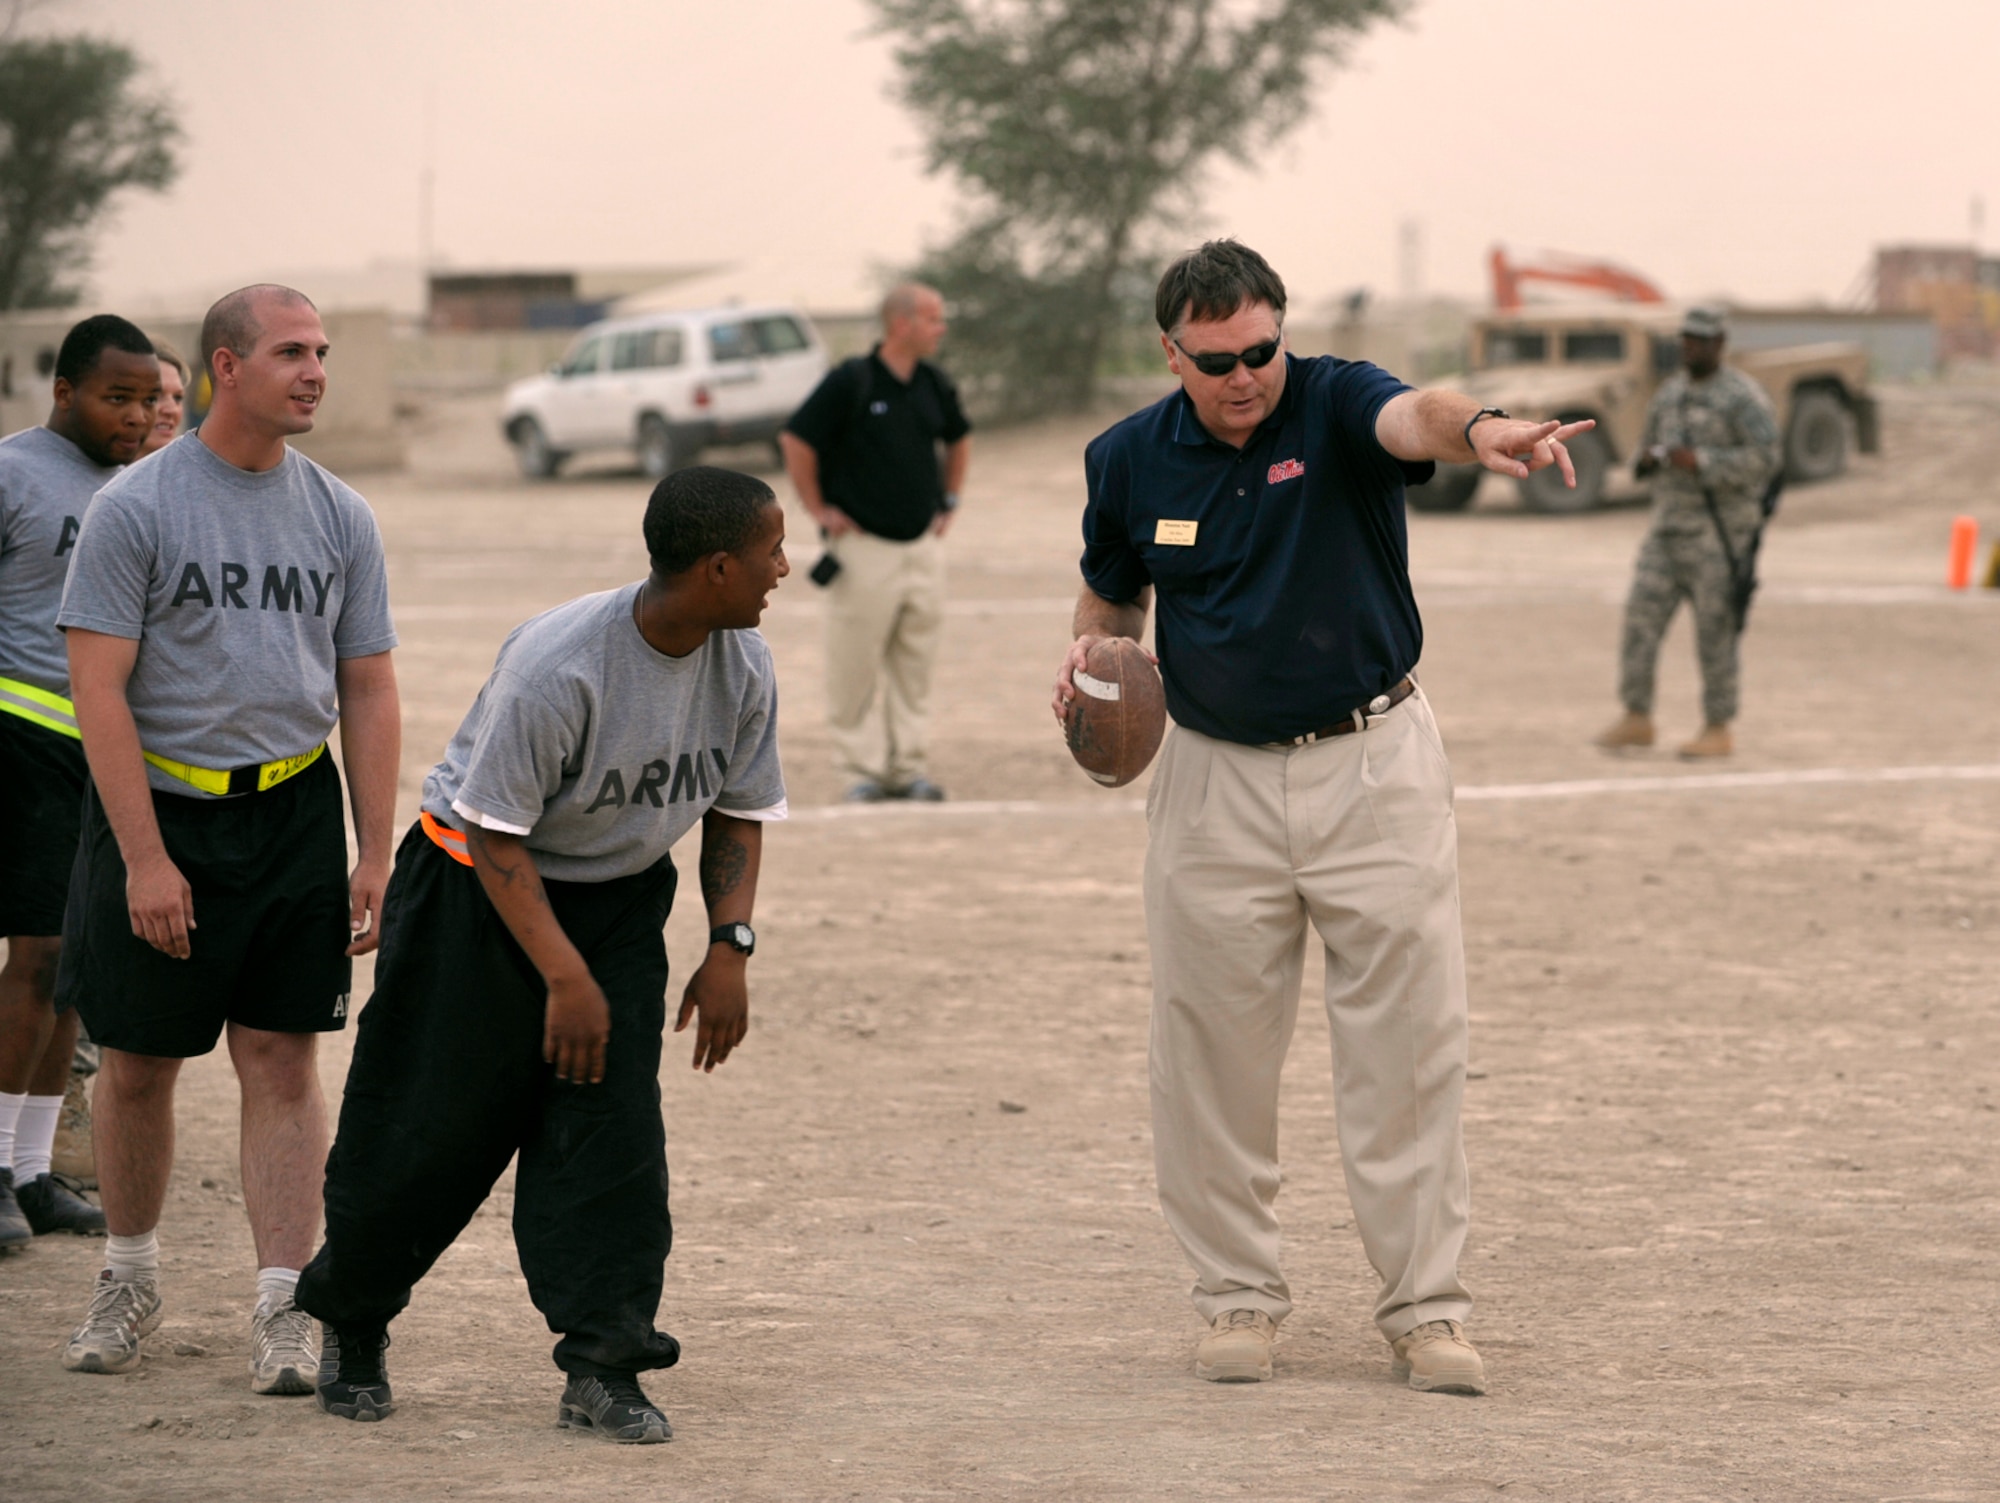 Houston Nutt, head football coach at Ole Miss, directs a soldier during a drill session with NCAA football coaches at Camp Victory, Iraq. Nutt is one of seven coaches participating in Coaches Tour 2009, a morale-boosting mission organized by Morale Entertainment, LLC., in association with Armed Forces Entertainment. Capt. Eric Junkins, a KC-135 pilot assigned to the 931st Air Refueling Group, was part of the aircrew that flew coaches from McConnell Air Force Base, Kan., to troops overseas. (U.S. Air Force photo/Tech. Sgt. Jason Schaap)